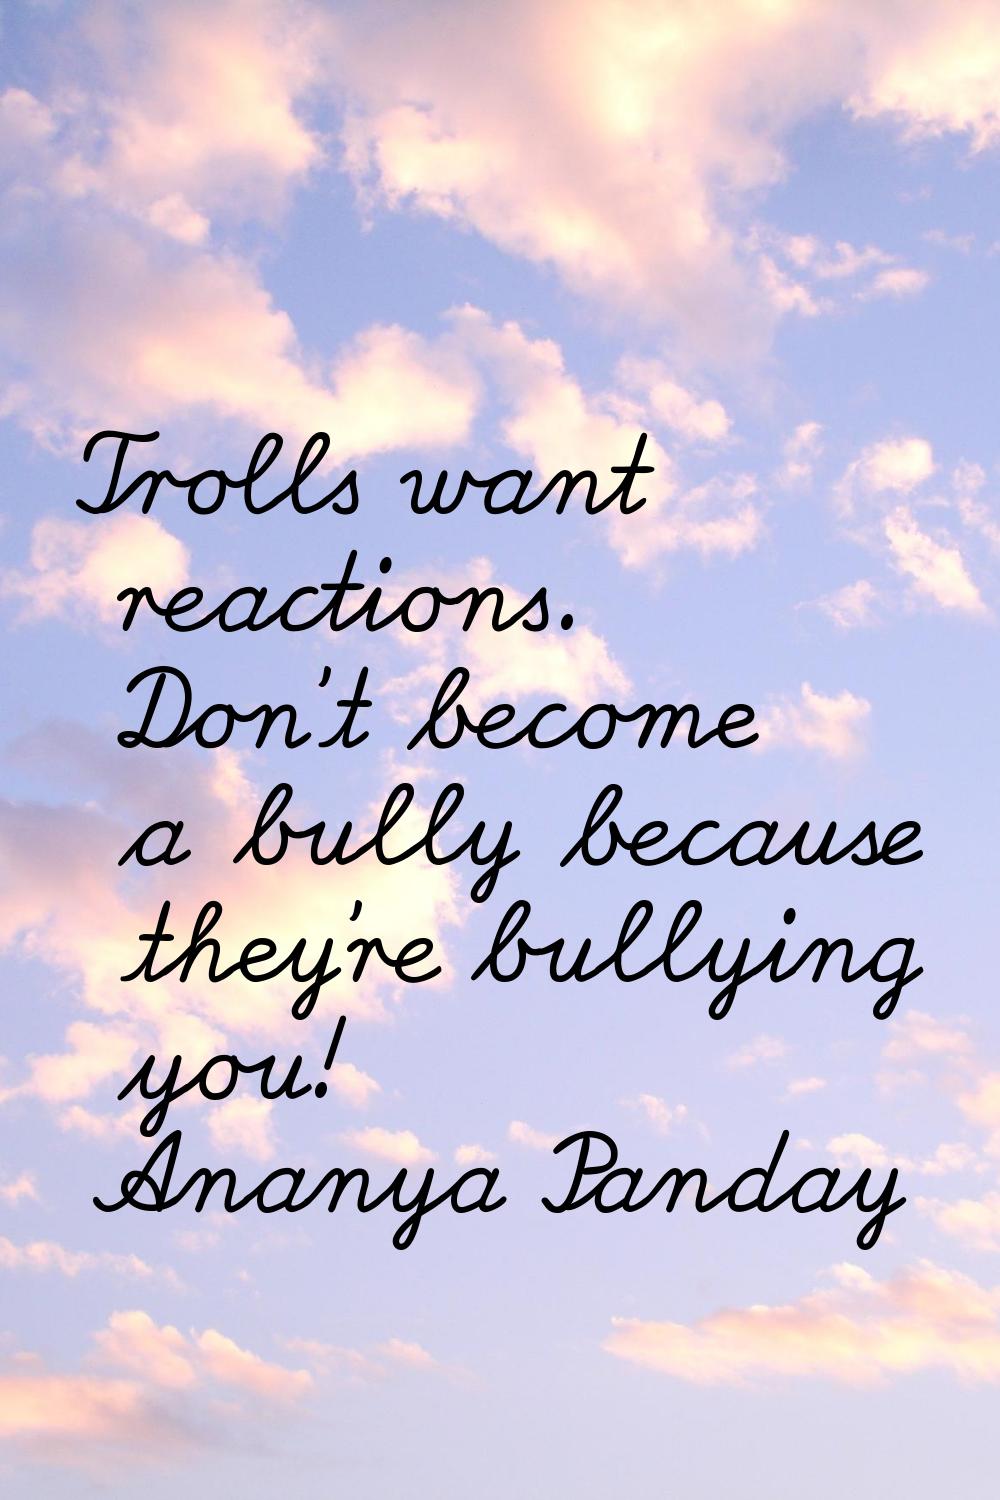 Trolls want reactions. Don't become a bully because they're bullying you!